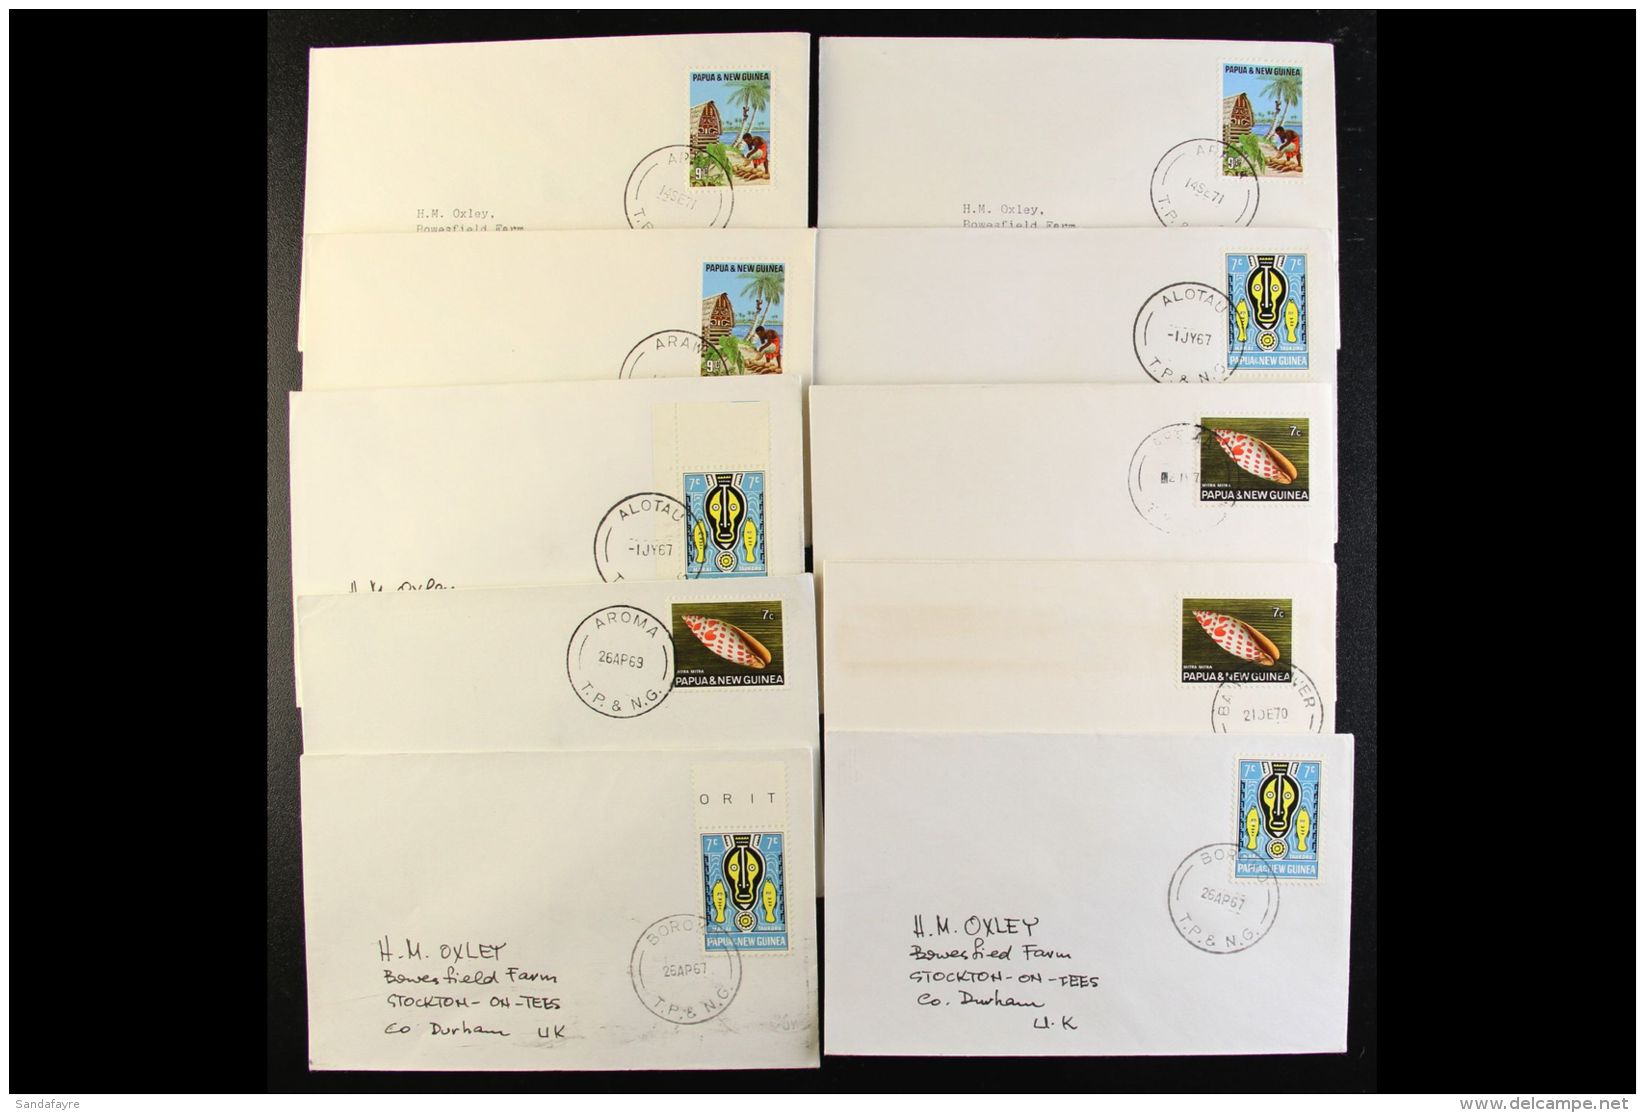 1967-1977 TOWN CDS CANCELS. Collection Of Covers Bearing Various Stamps Tied By Double Arc Cds's, Inc Alotau,... - Papúa Nueva Guinea